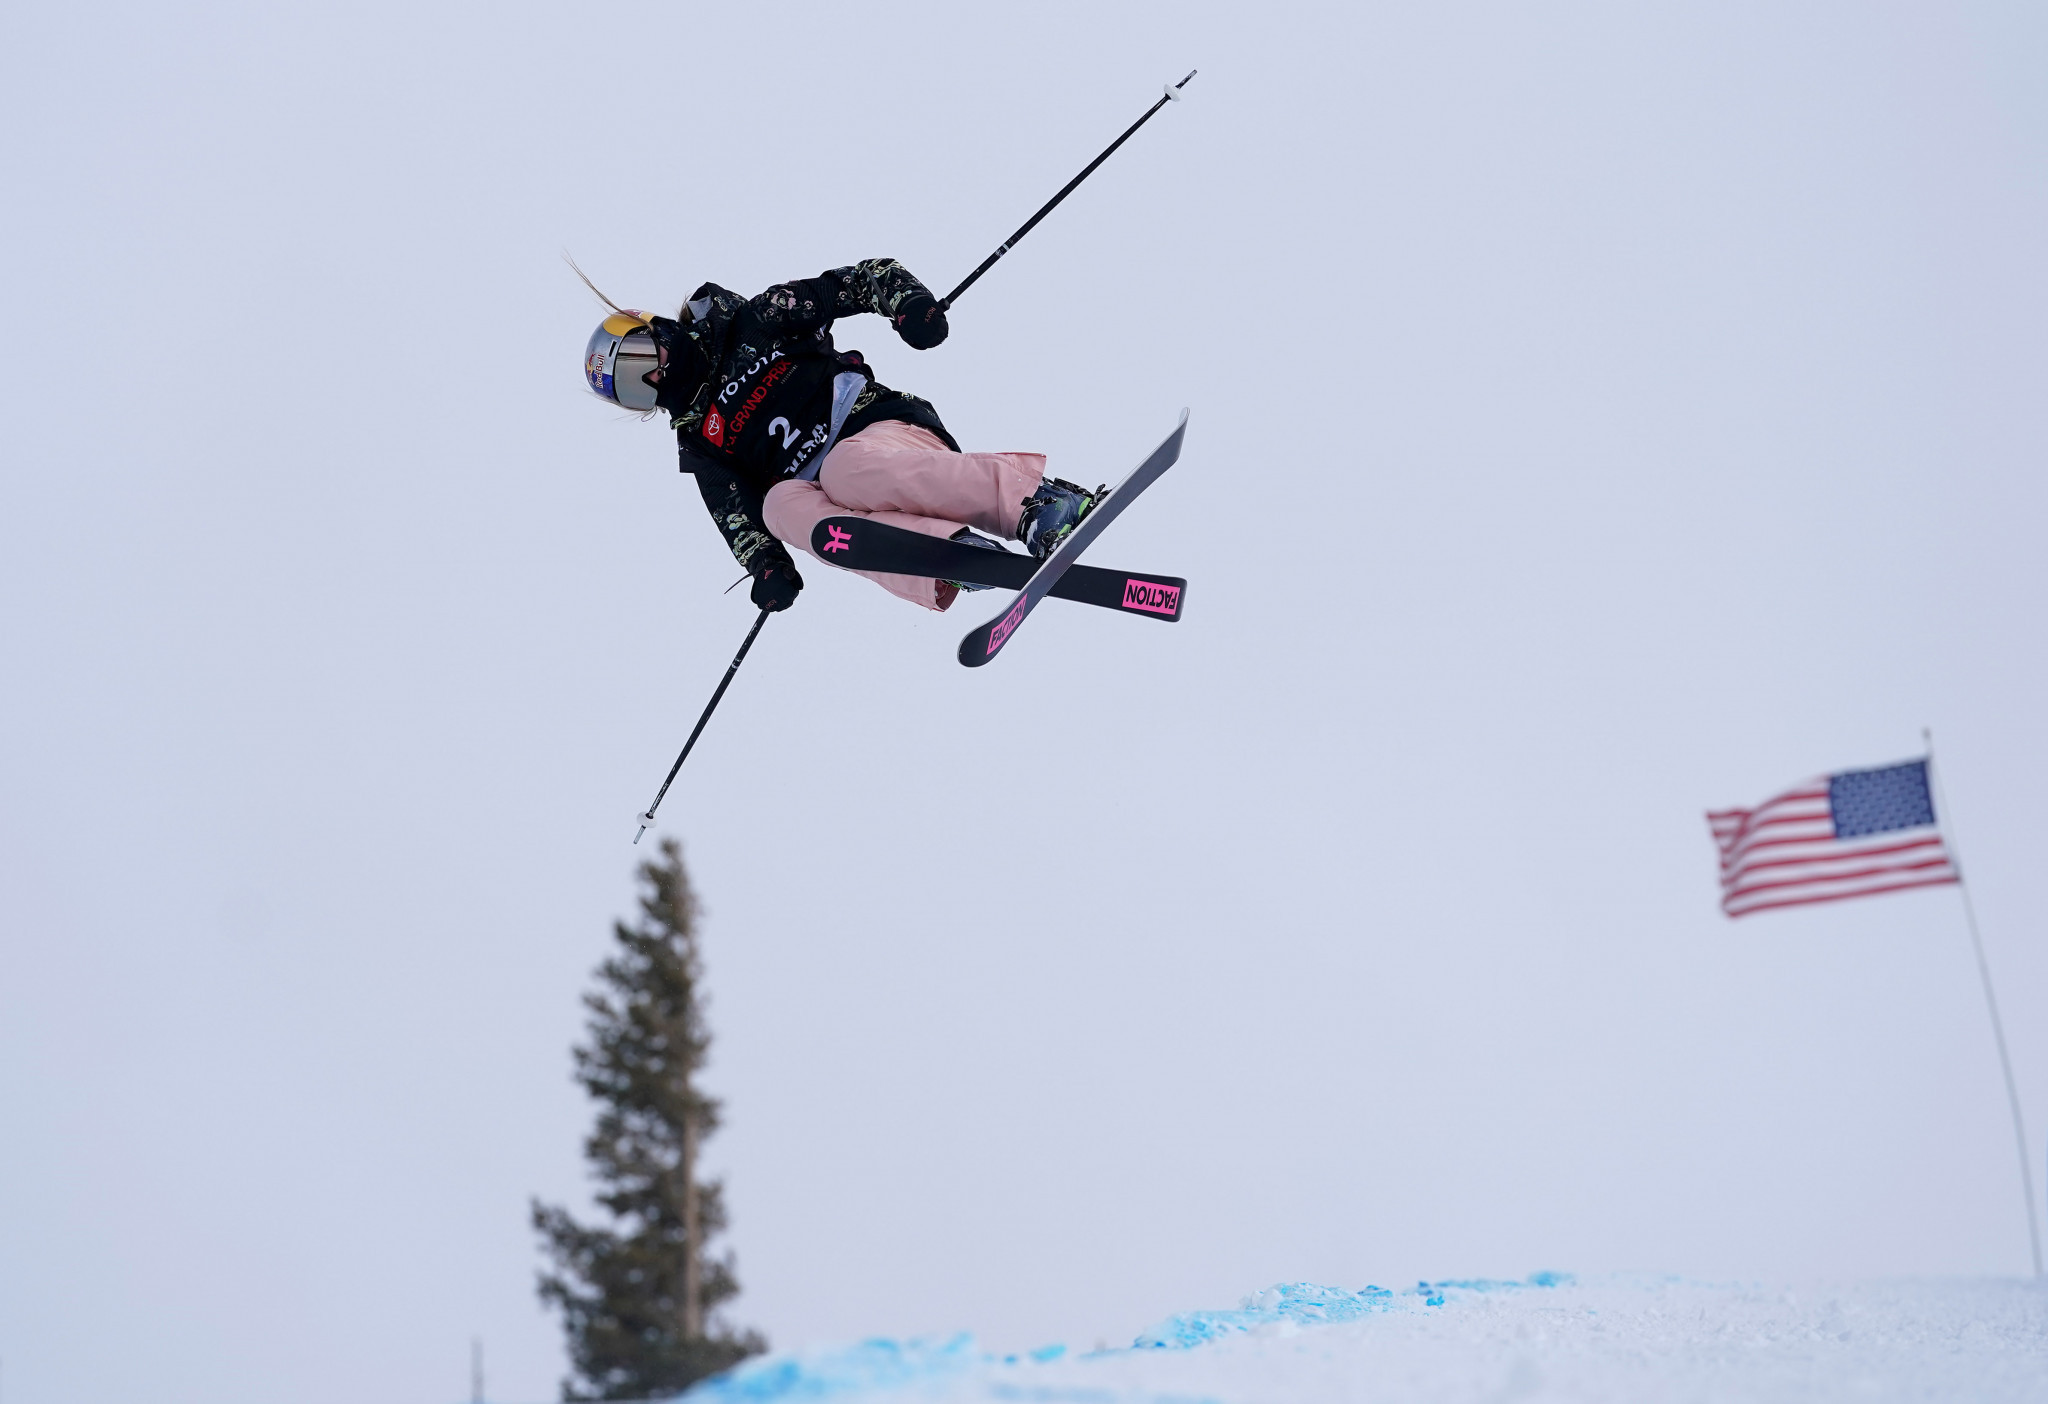 Kelly Sildaru leads a strong list of competitors in the FIS Freeski Halfpipe World Cup season ©Getty Images